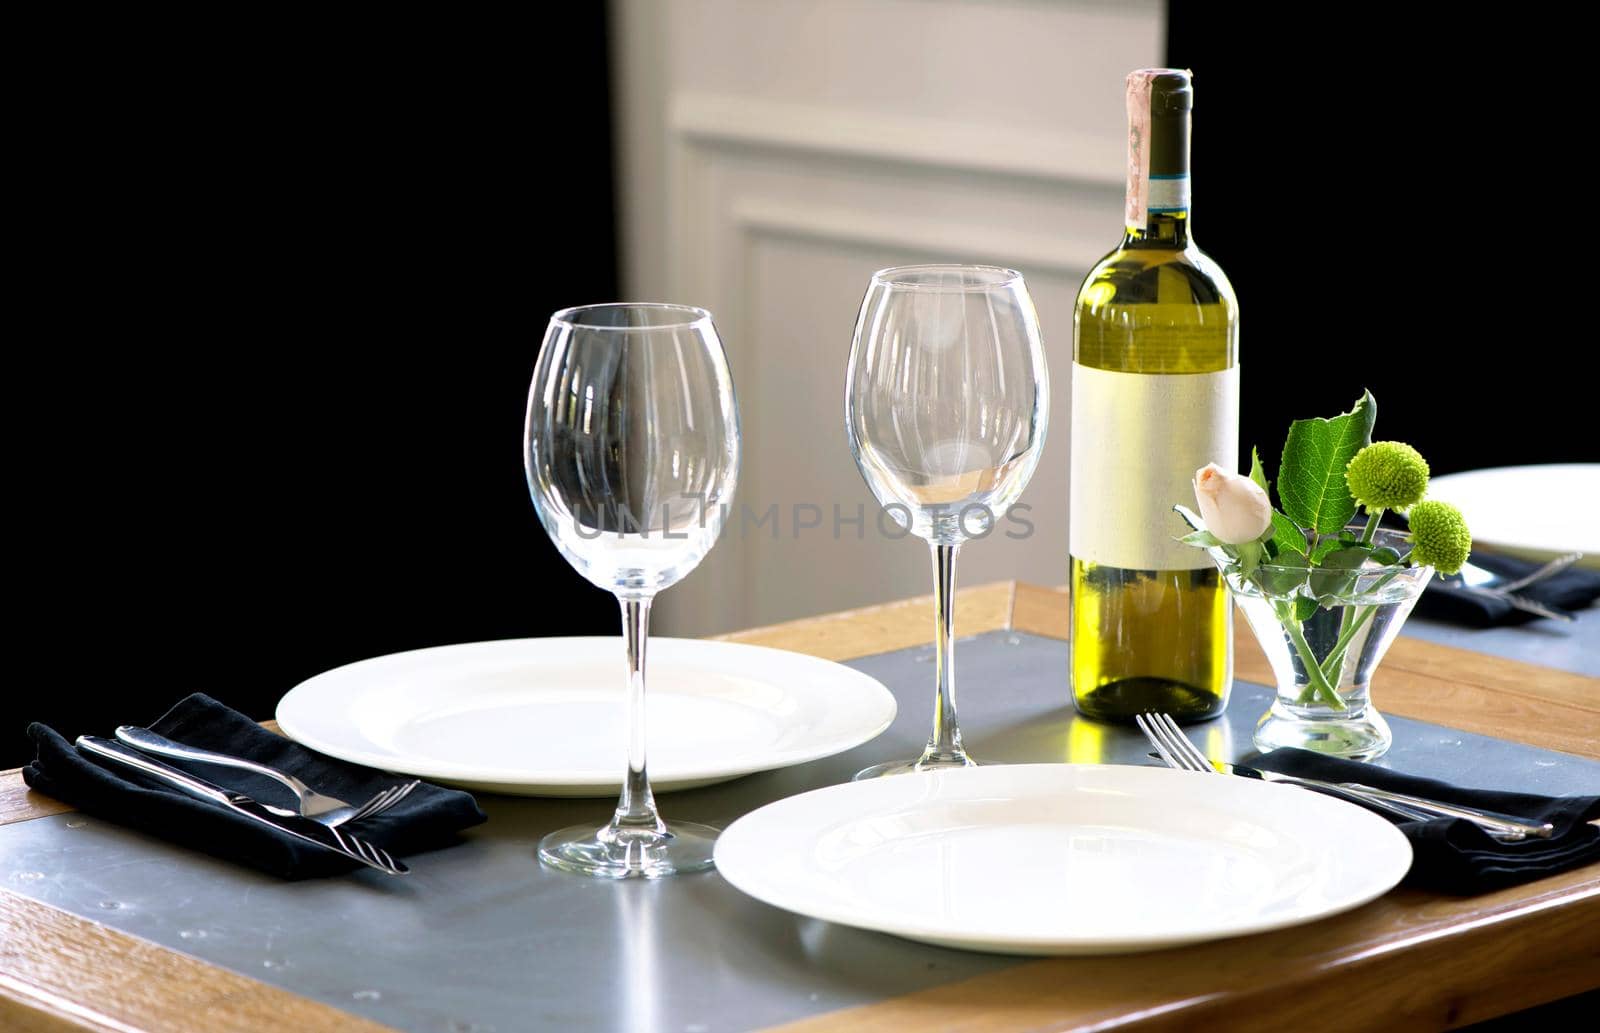 Served table in restaurant, focus on near glass and plate